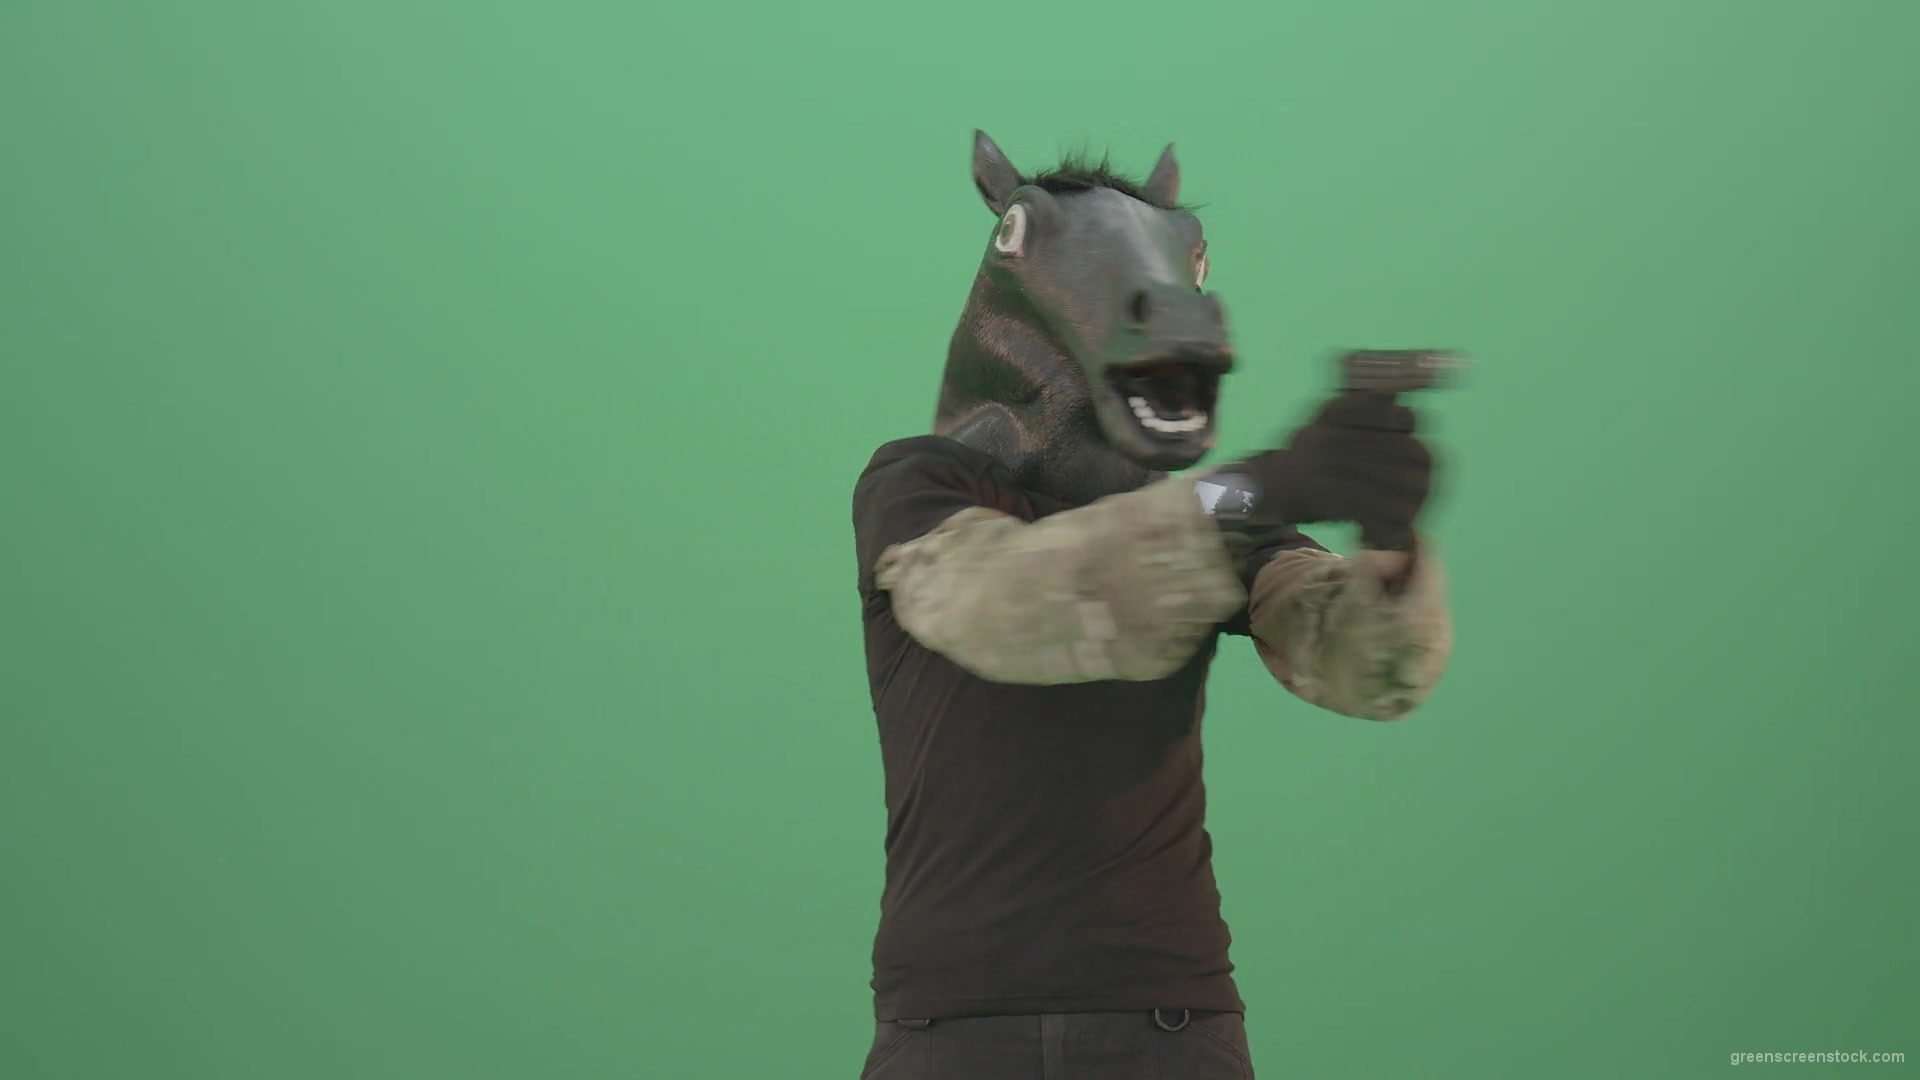 Funny-Horse-Man-in-Mask-shooting-enemies-isolated-on-green-screen-4K-Video-Footage-1920_007 Green Screen Stock